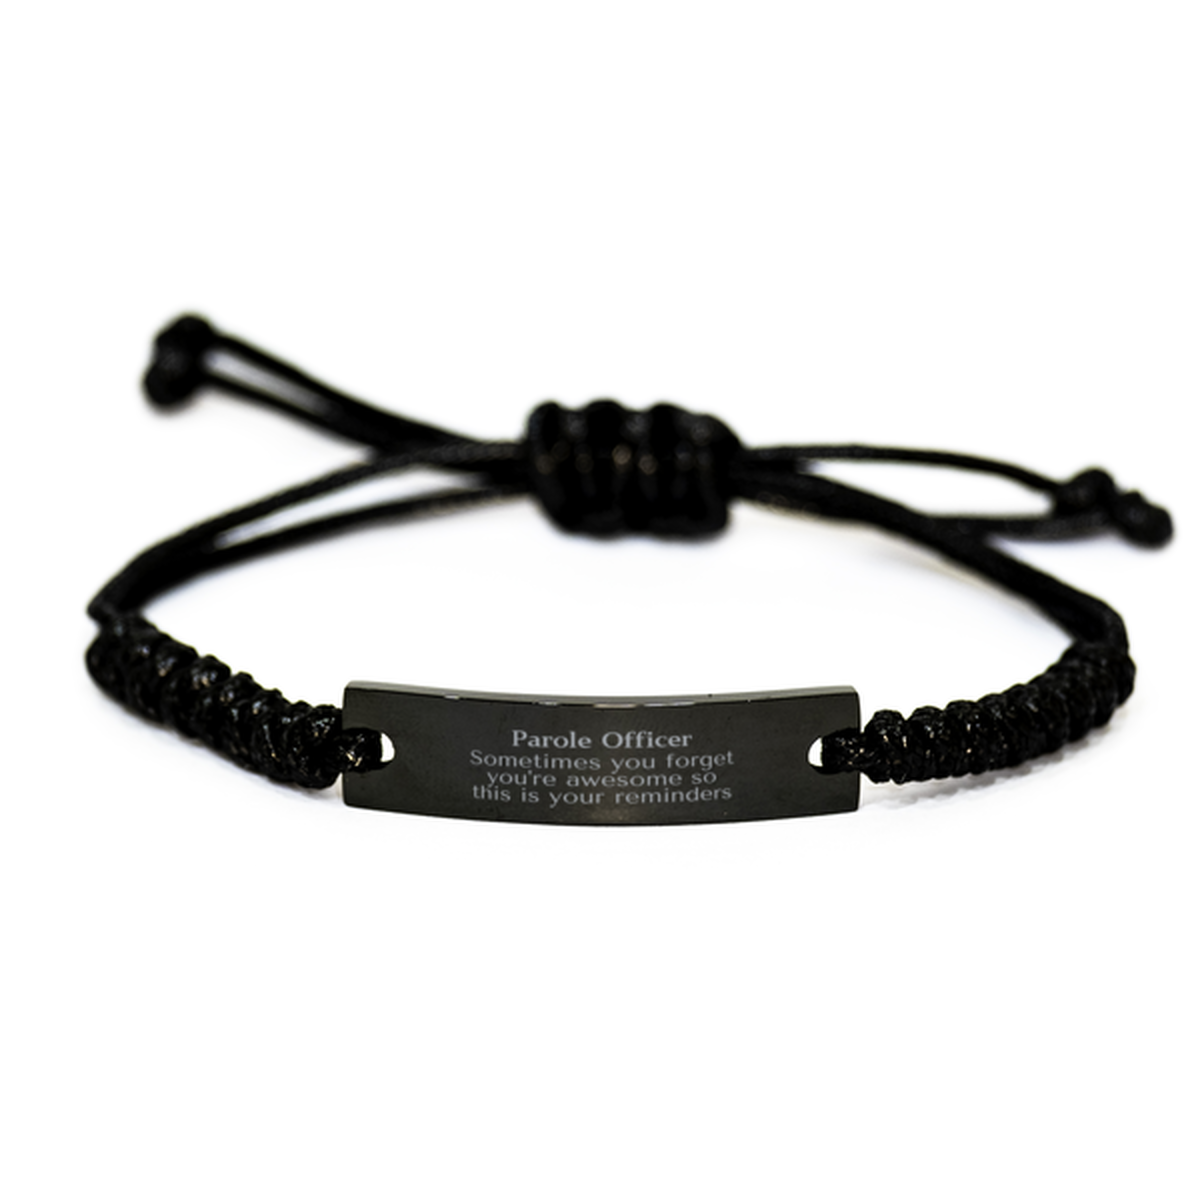 Sentimental Parole Officer Black Rope Bracelet, Parole Officer Sometimes you forget you're awesome so this is your reminders, Graduation Christmas Birthday Gifts for Parole Officer, Men, Women, Coworkers